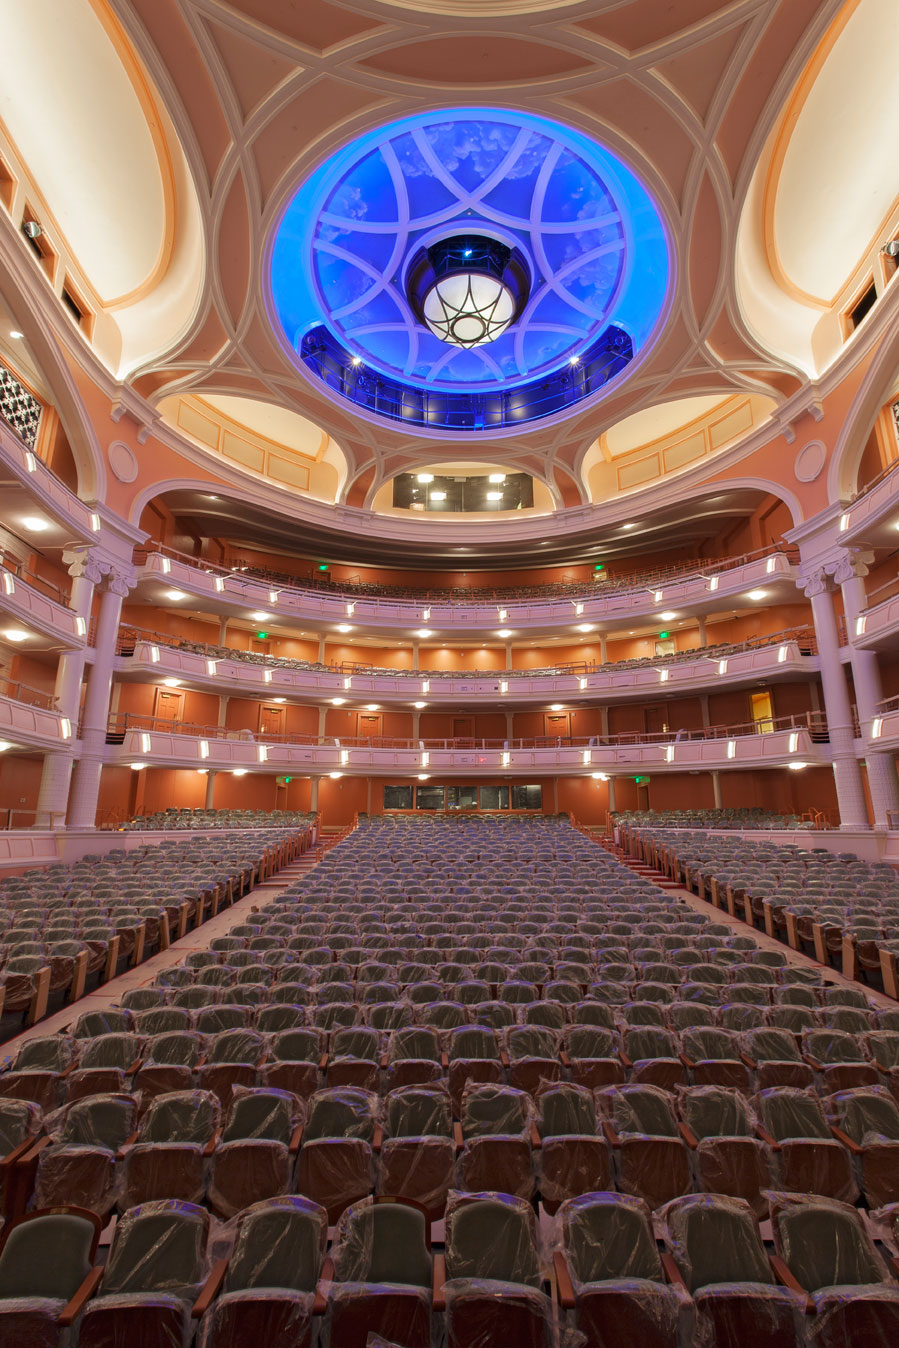 The neoclassical Gaillard Center and its centerpiece Performance Hall are modeled after the great European concert halls, with an orchestra level surrounded by three balcony tiers.